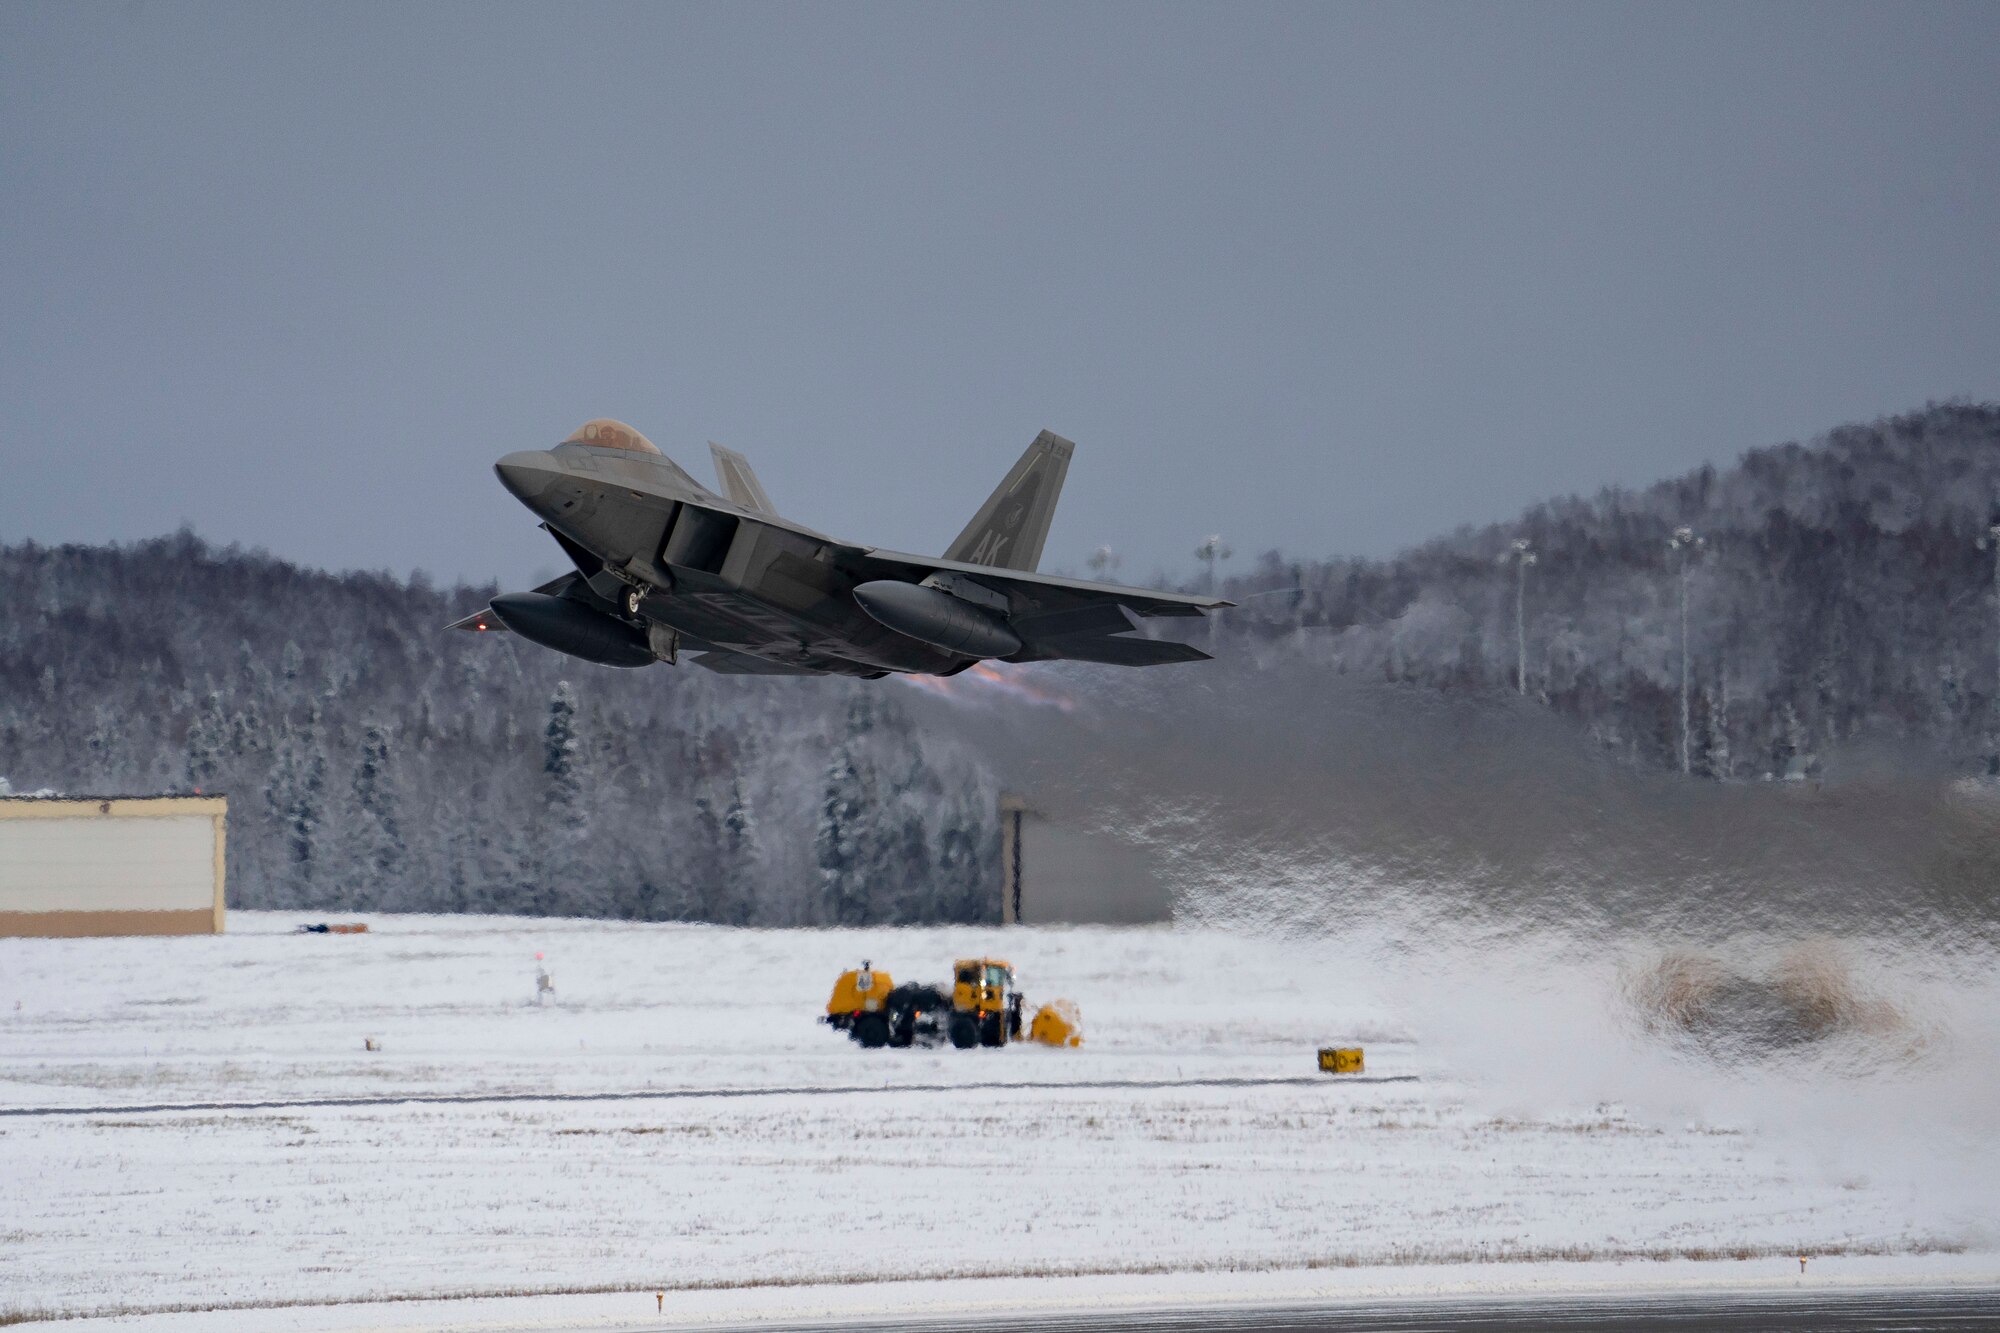 An F-22 Raptor and a snow plow during an aircraft launch